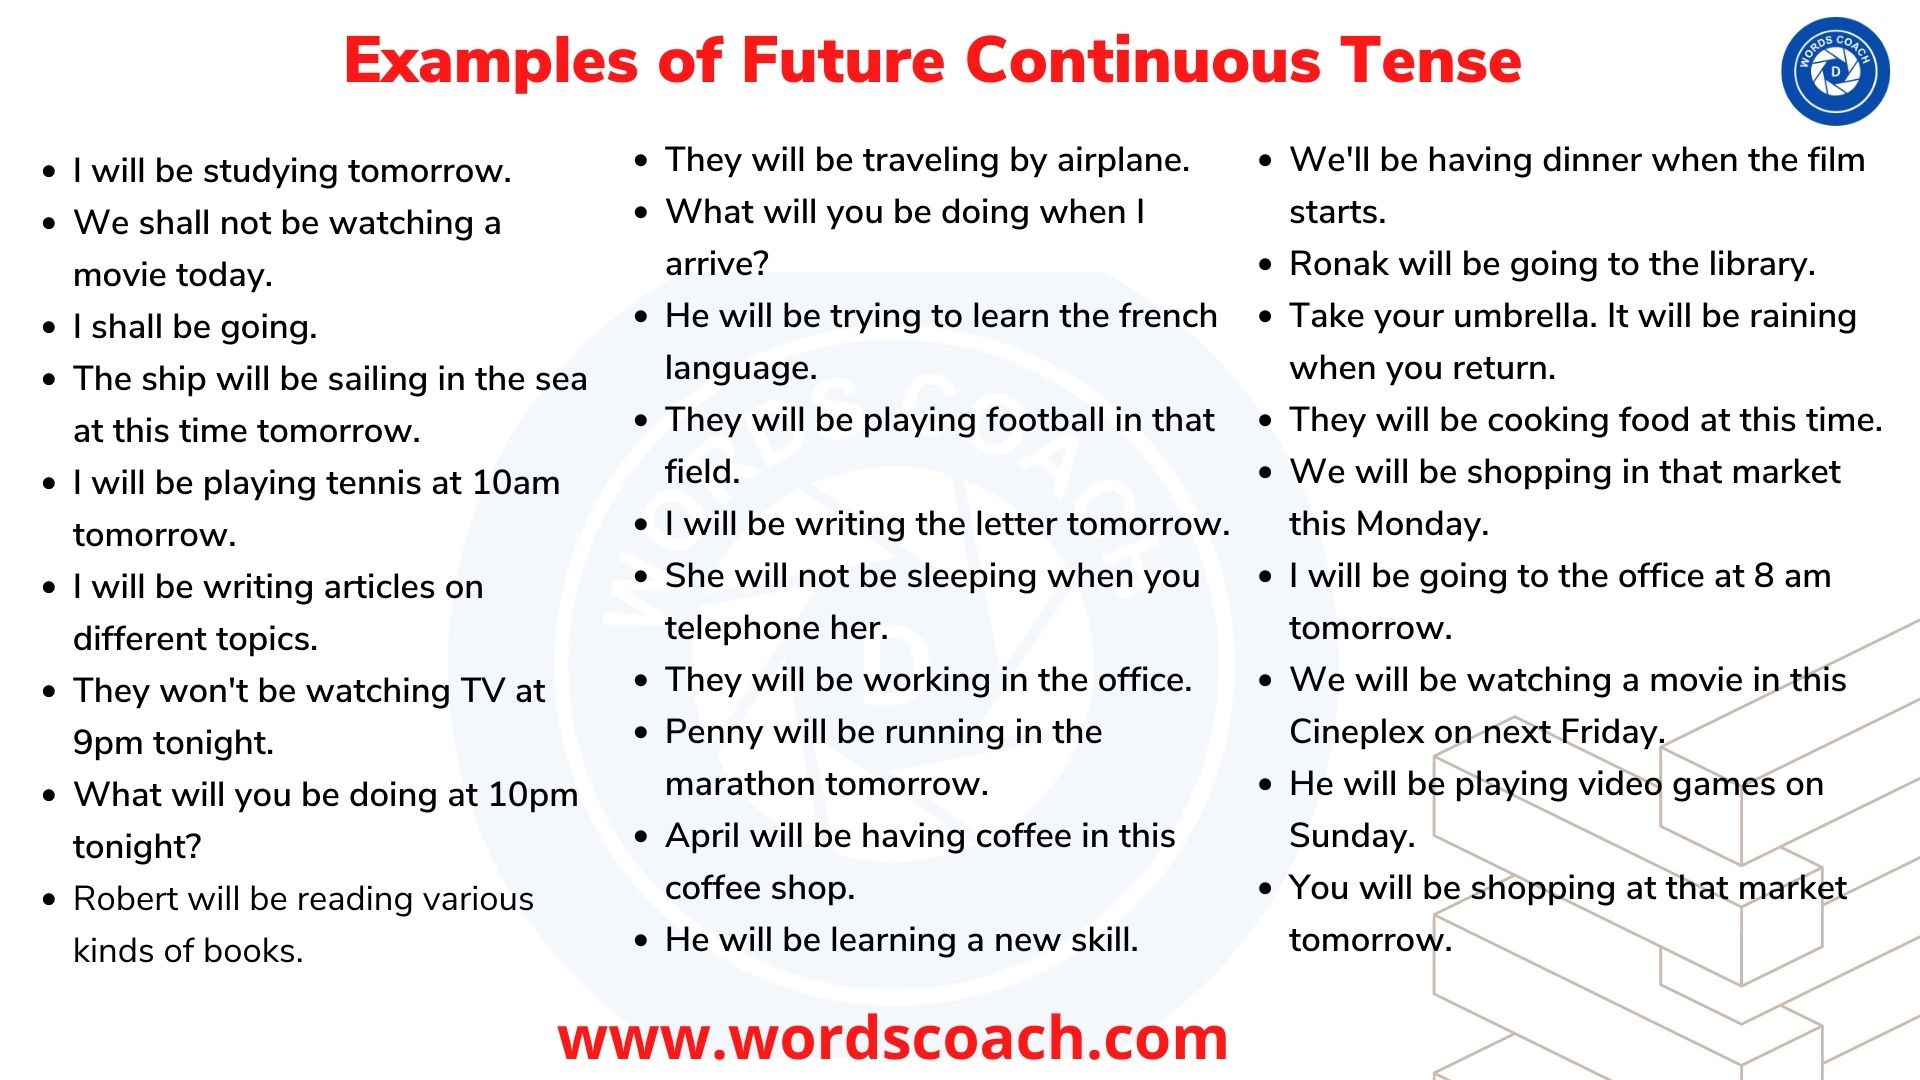 Examples of Future Continuous Tense - wordscoach.com